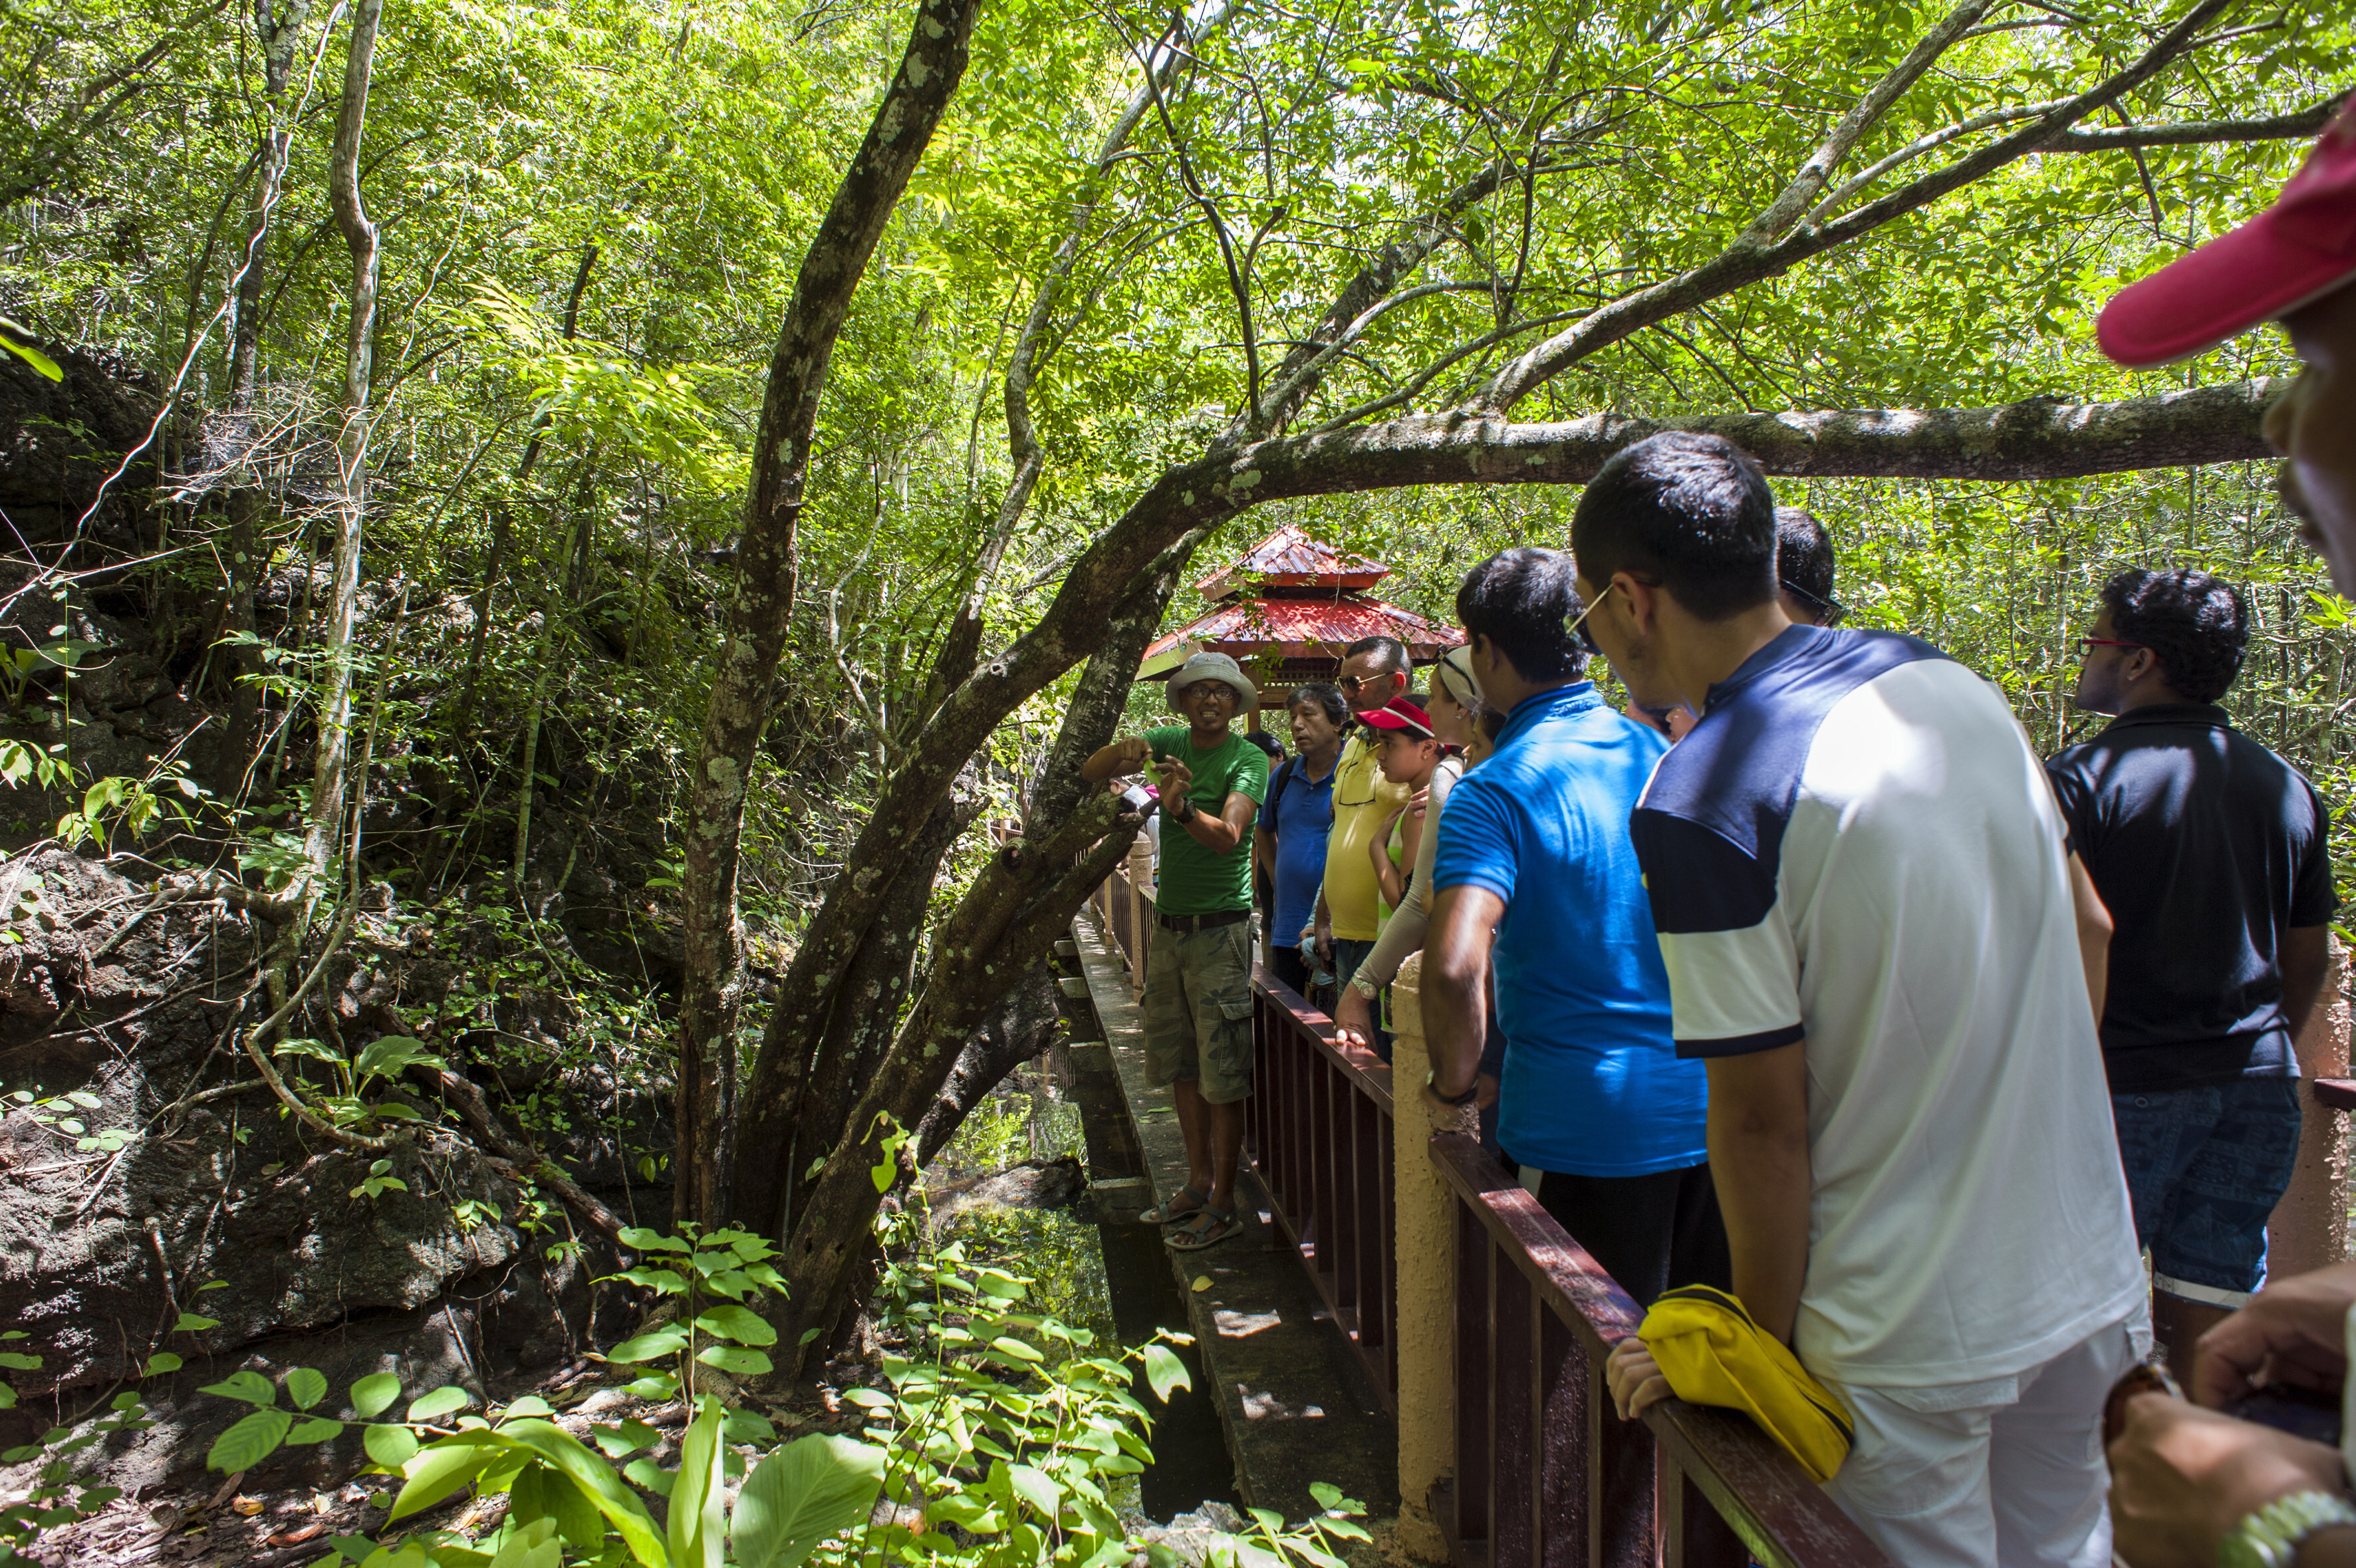 A guide explains the mangrove forest to tourists at Kilim Karst Geoforest Park in Langkawi. Photo by Leisa Tyler/LightRocket via Getty Images